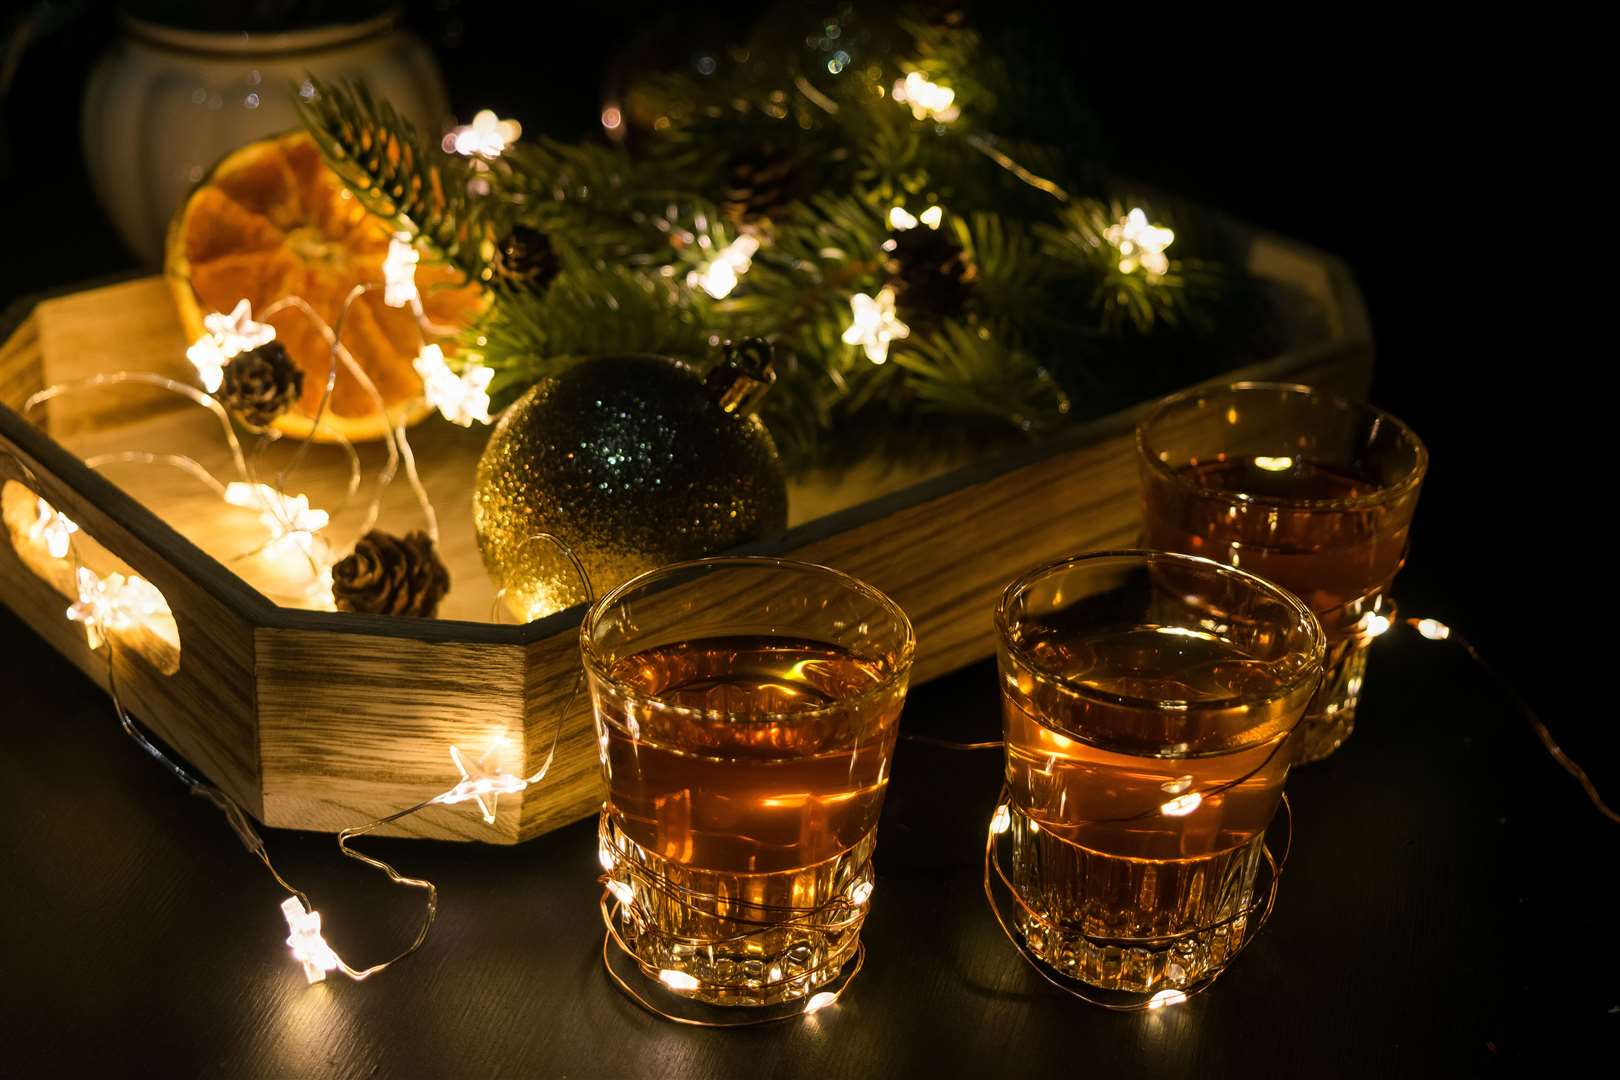 What marvelous malt will you enjoy when you celebrate the festive season and see in 2020? There have been a number of standout drams this year alone from our local distilleries.